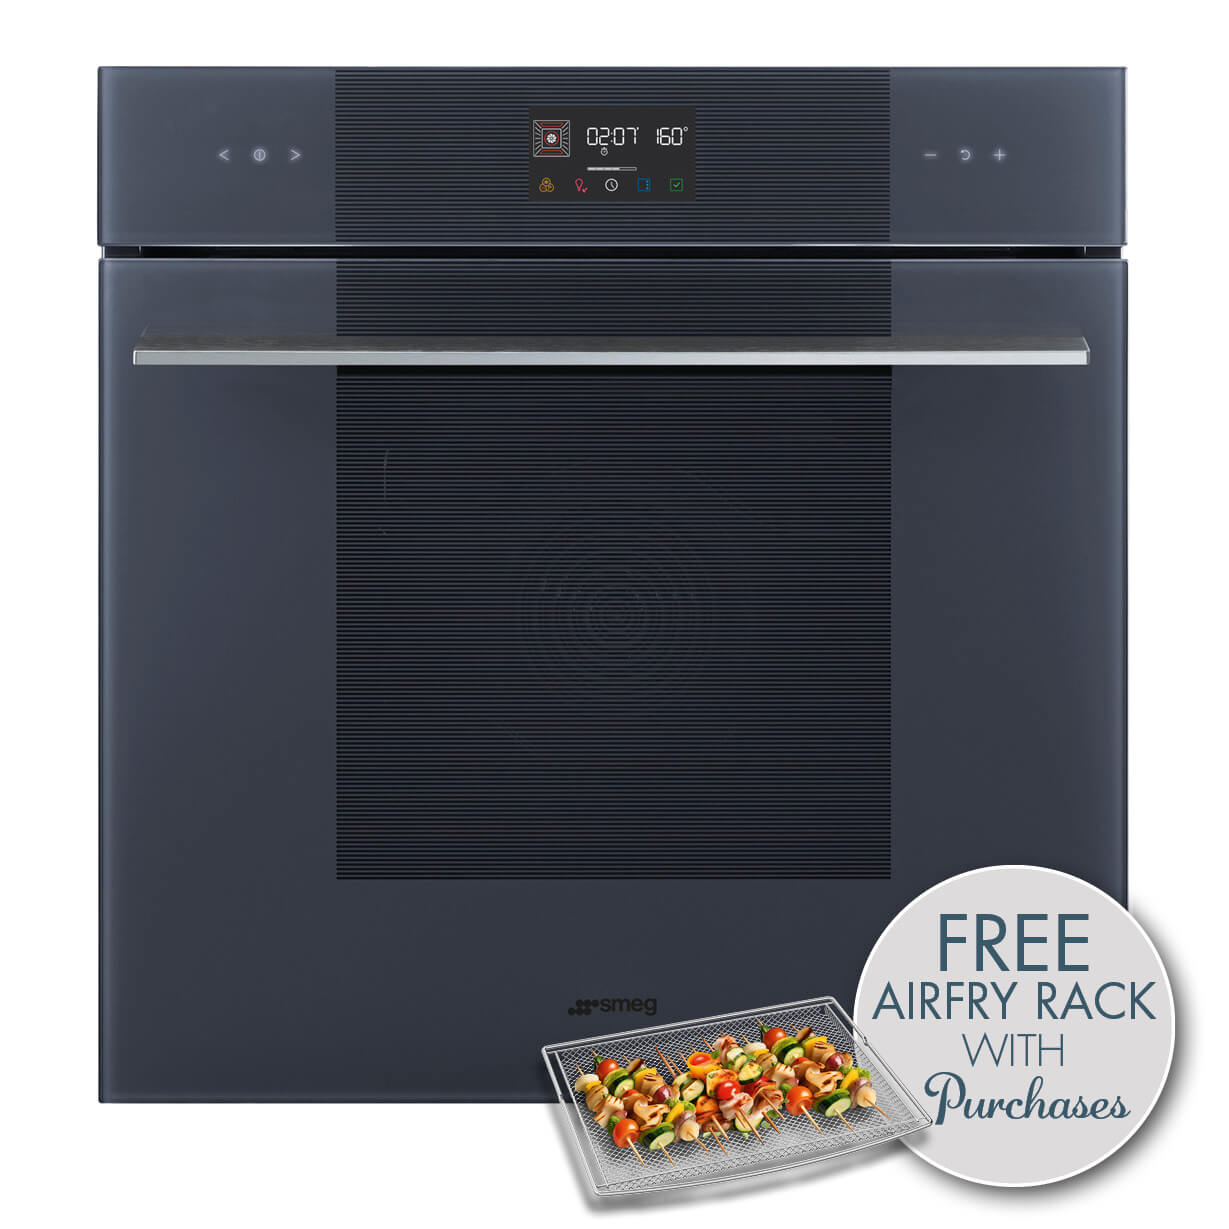 https://shop.smeguk.com/globalassets/productimages/promotional-images/2023/airfry-with-oven-promo/linea/nj-sop6102tg-linea-airfry-promo8.jpg?h=200